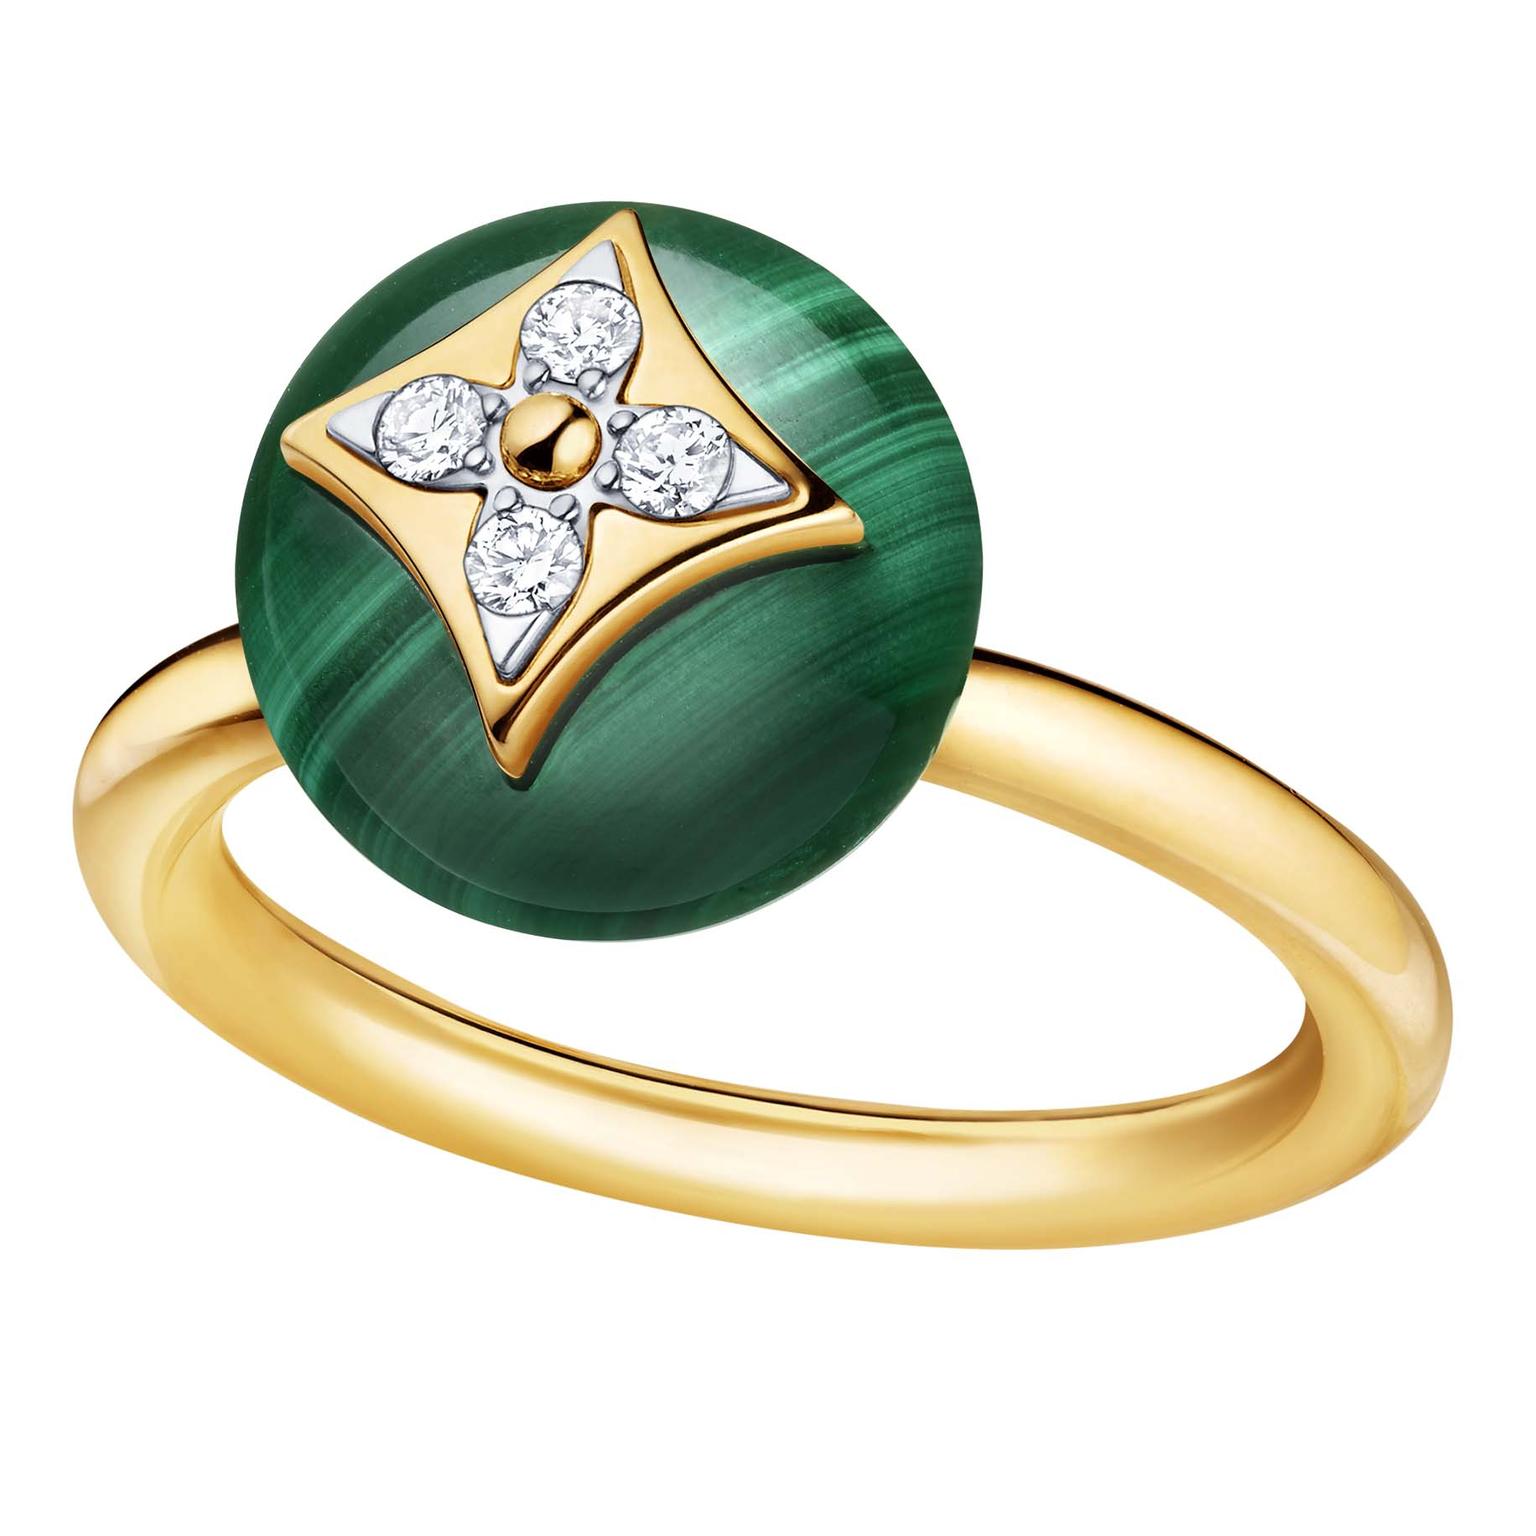 Louis Vuitton B.Blossom yellow gold ring in malachite